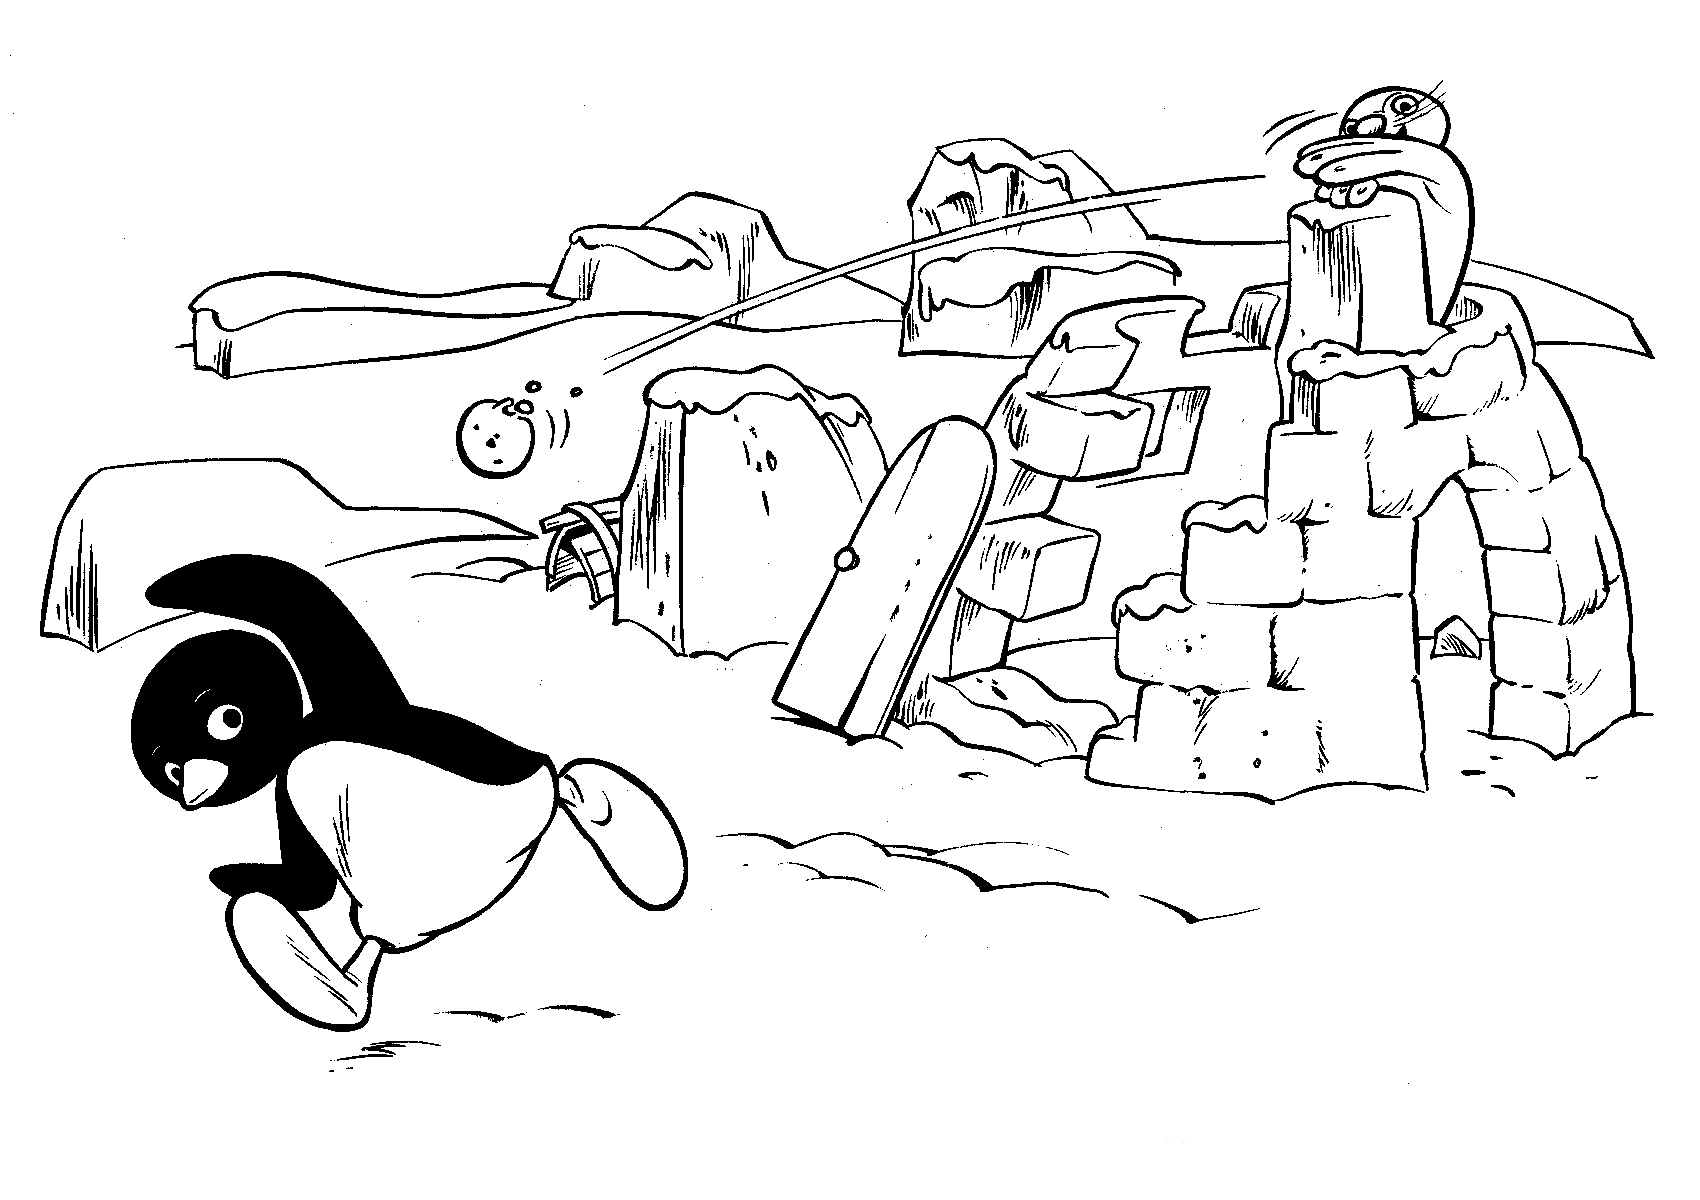 Drawing 15 from Pingu coloring page to print and coloring